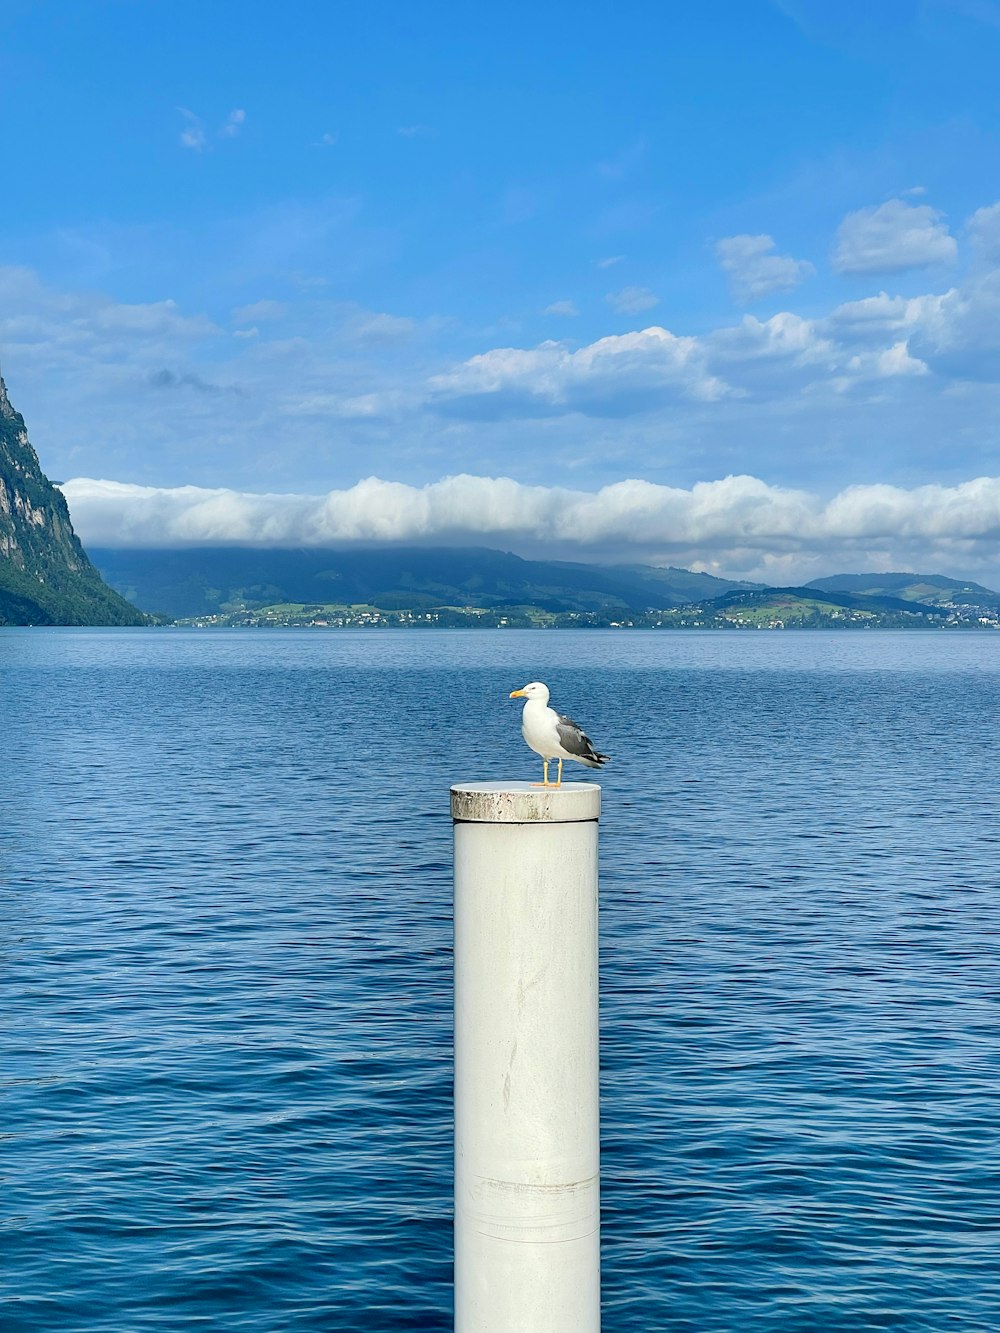 white bird on gray concrete post near body of water during daytime